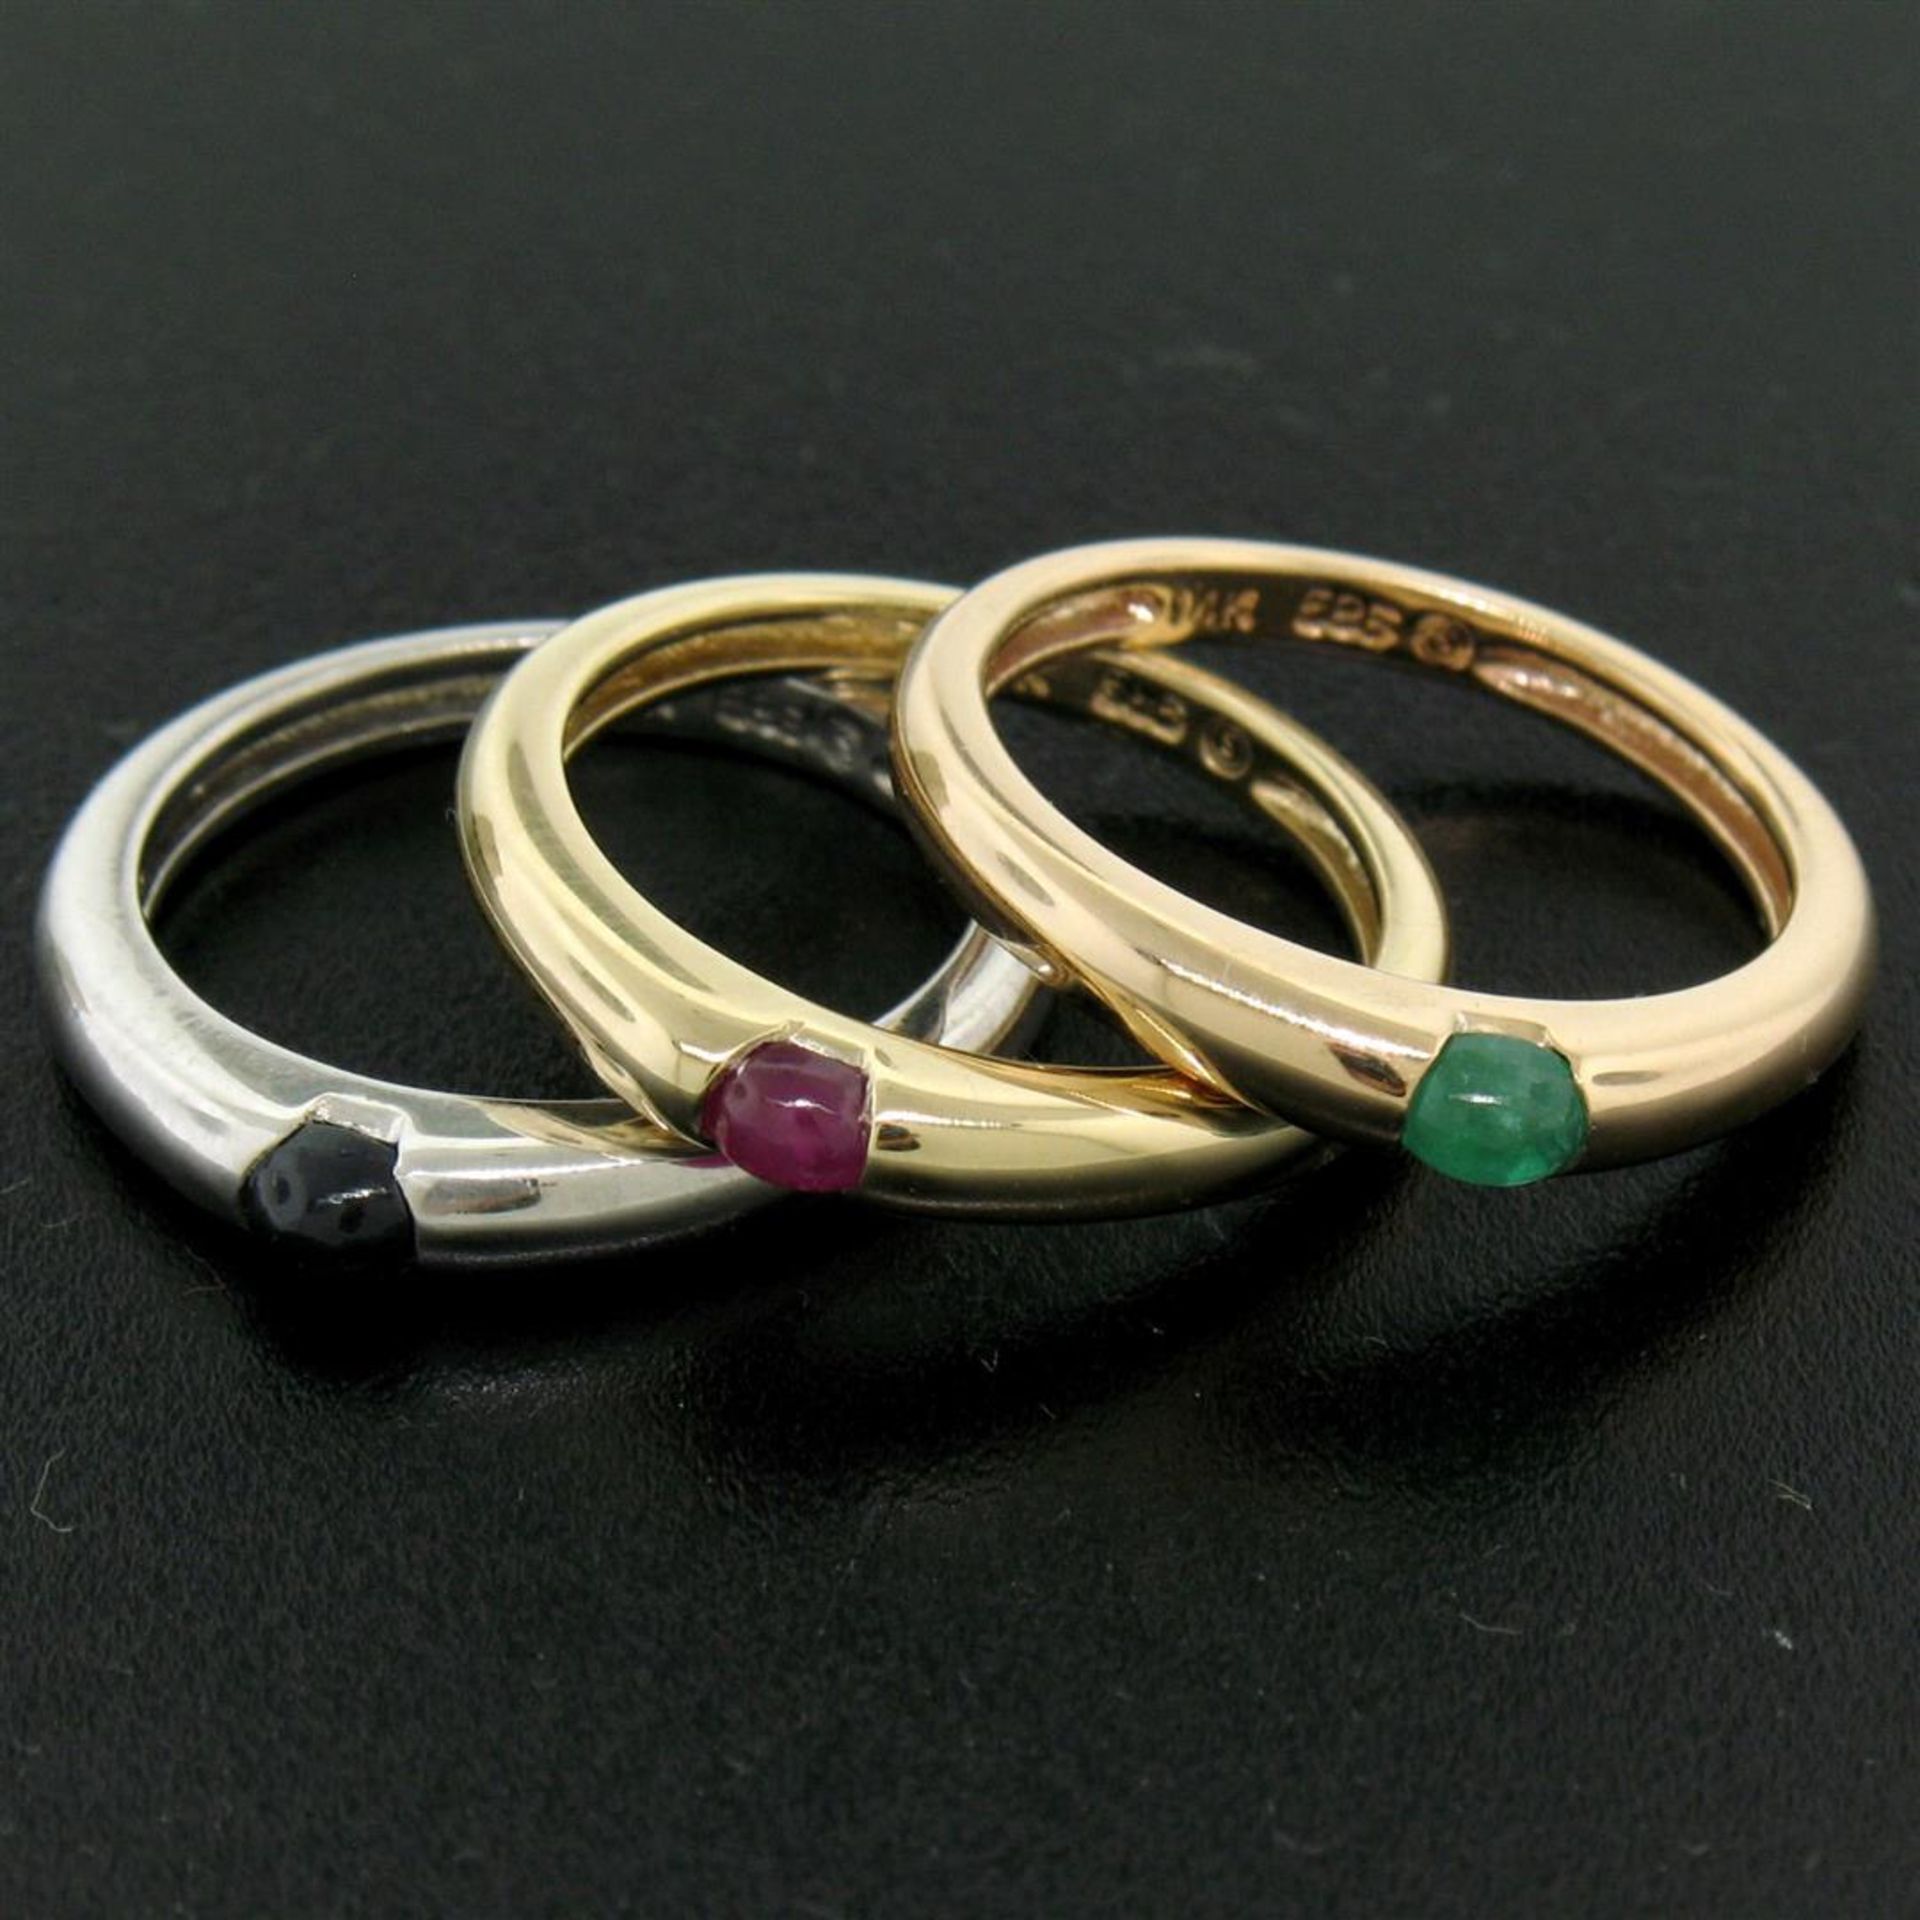 14K Tri Color Gold 3 Stackable Tension Set Emerald Sapphire Ruby Solitaire Rings - Image 4 of 8